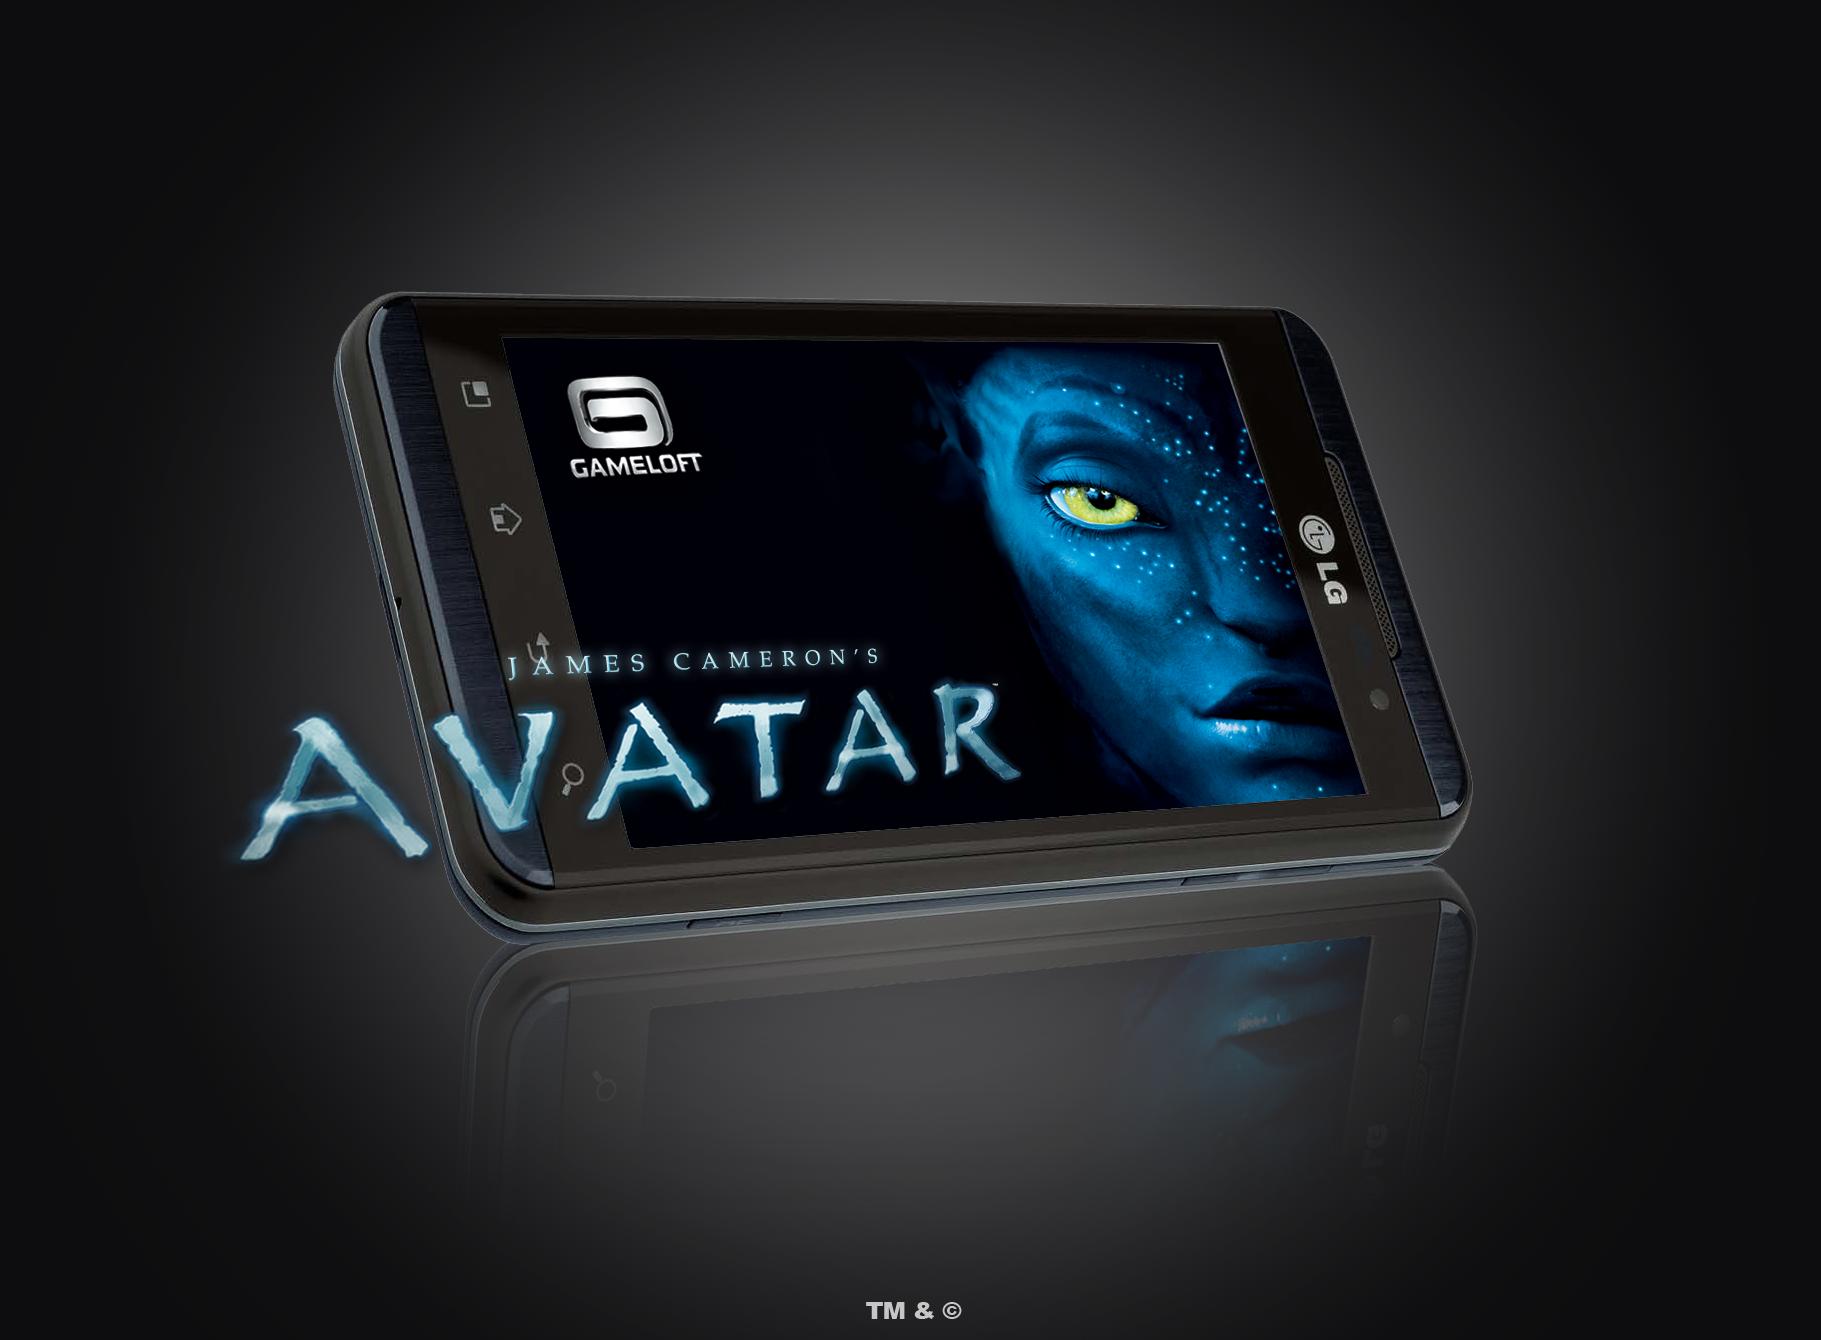 Gameloft’s Avatar game image is displayed on LG Optimus 3D